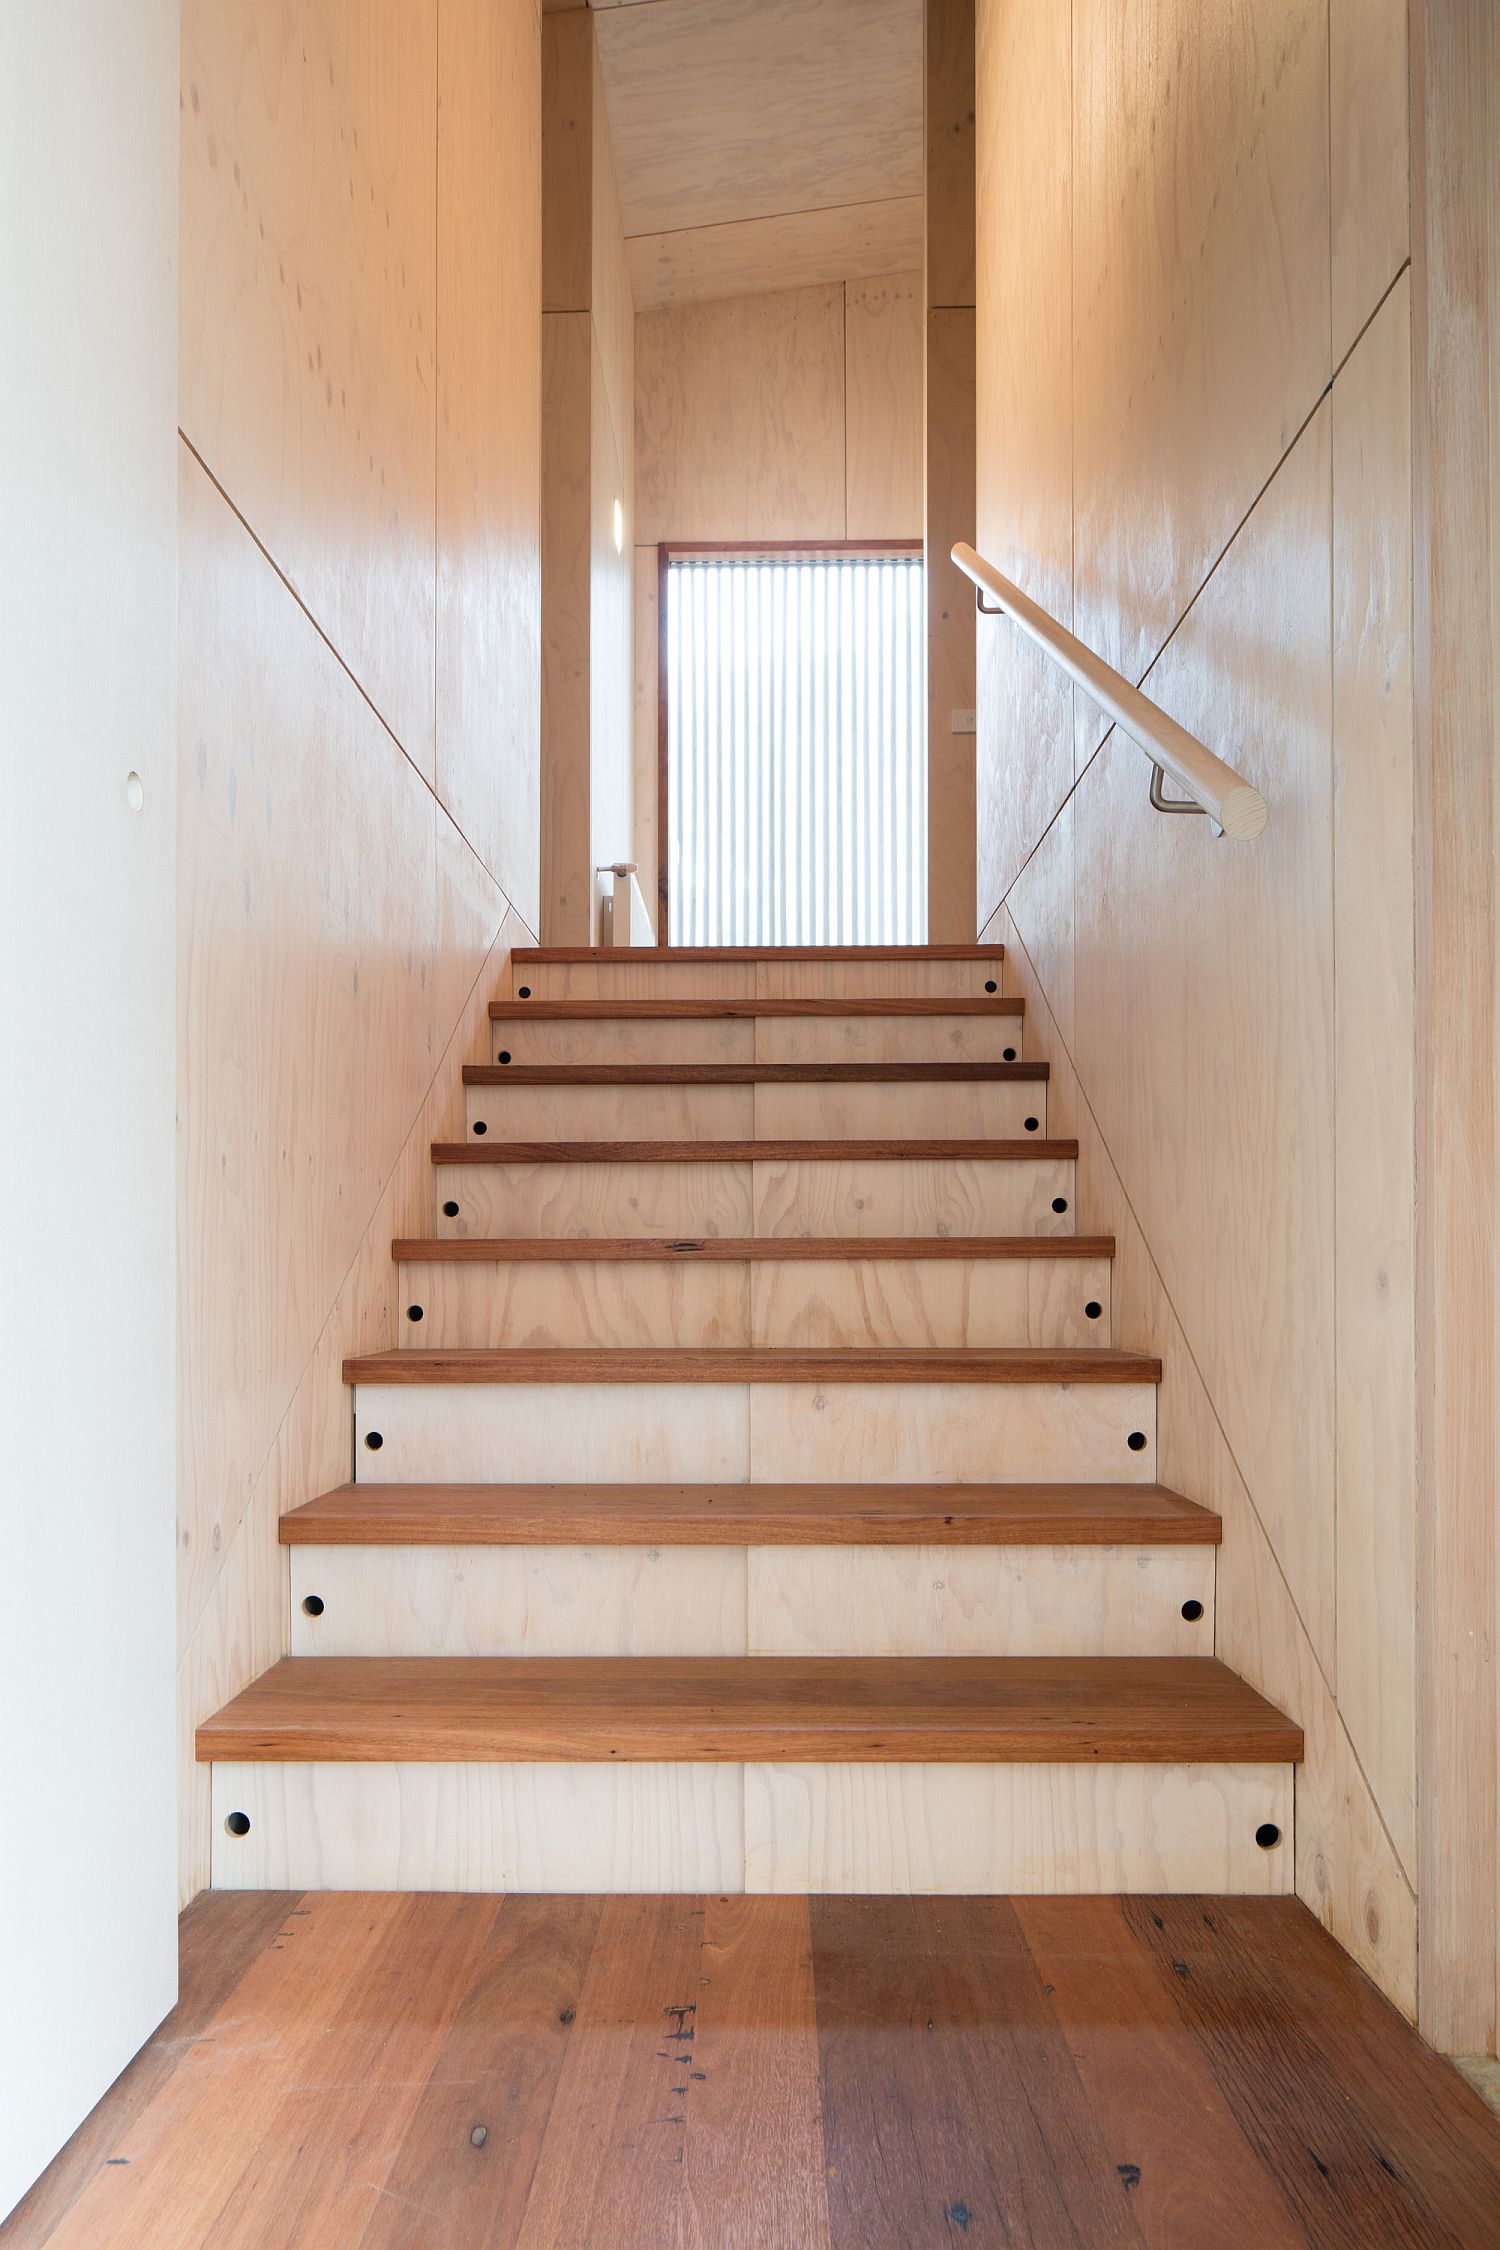 Wooden steps connecting different floors of the bushland home